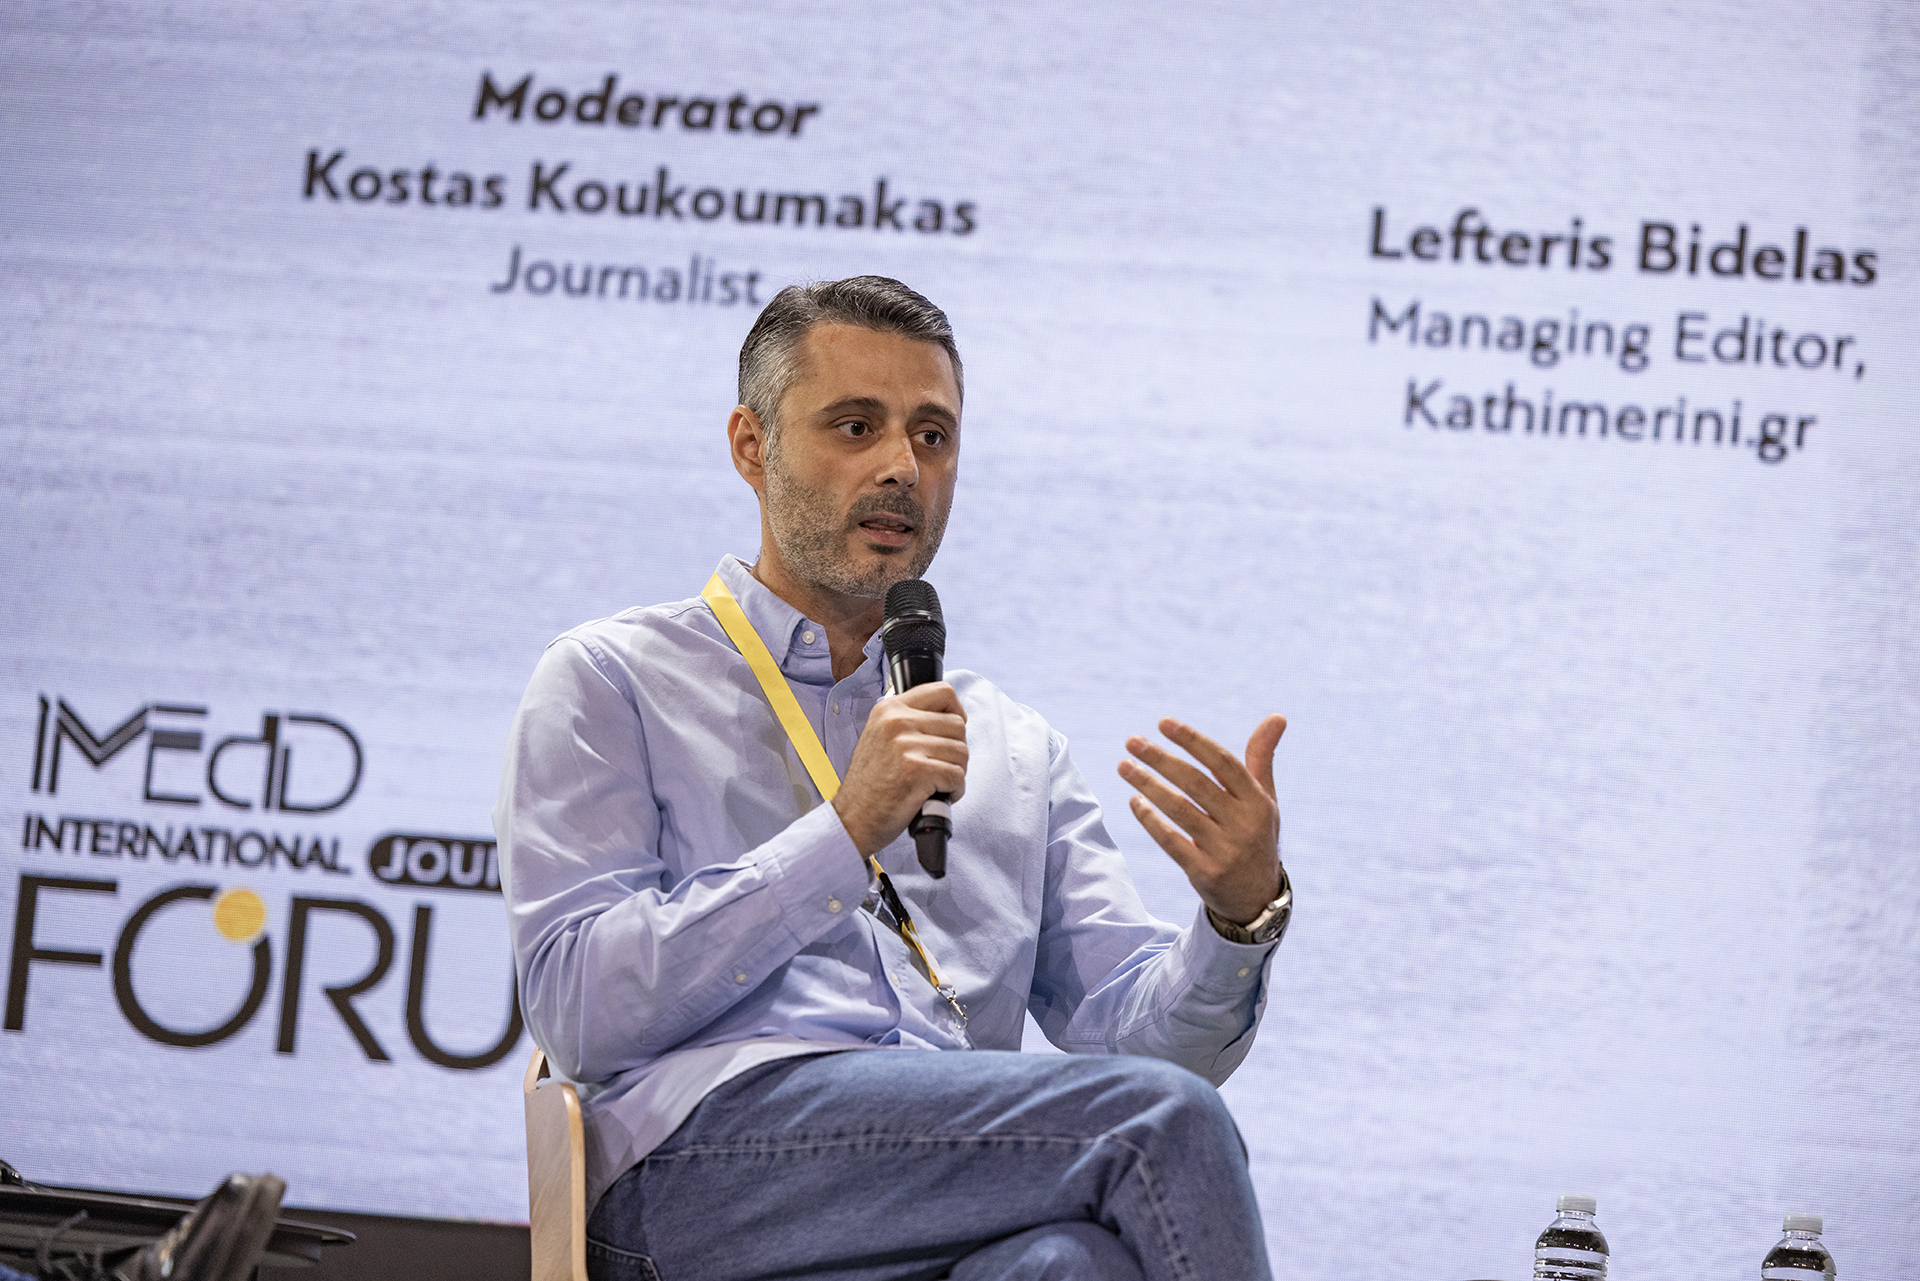 Lefteris Bintelas, Managing Director of Kathimerini.gr, speaks holding a microphone, in the context of the panel "We need to talk about the far right, but how?", held at the iMEdD International Journalism Forum in September 2023.